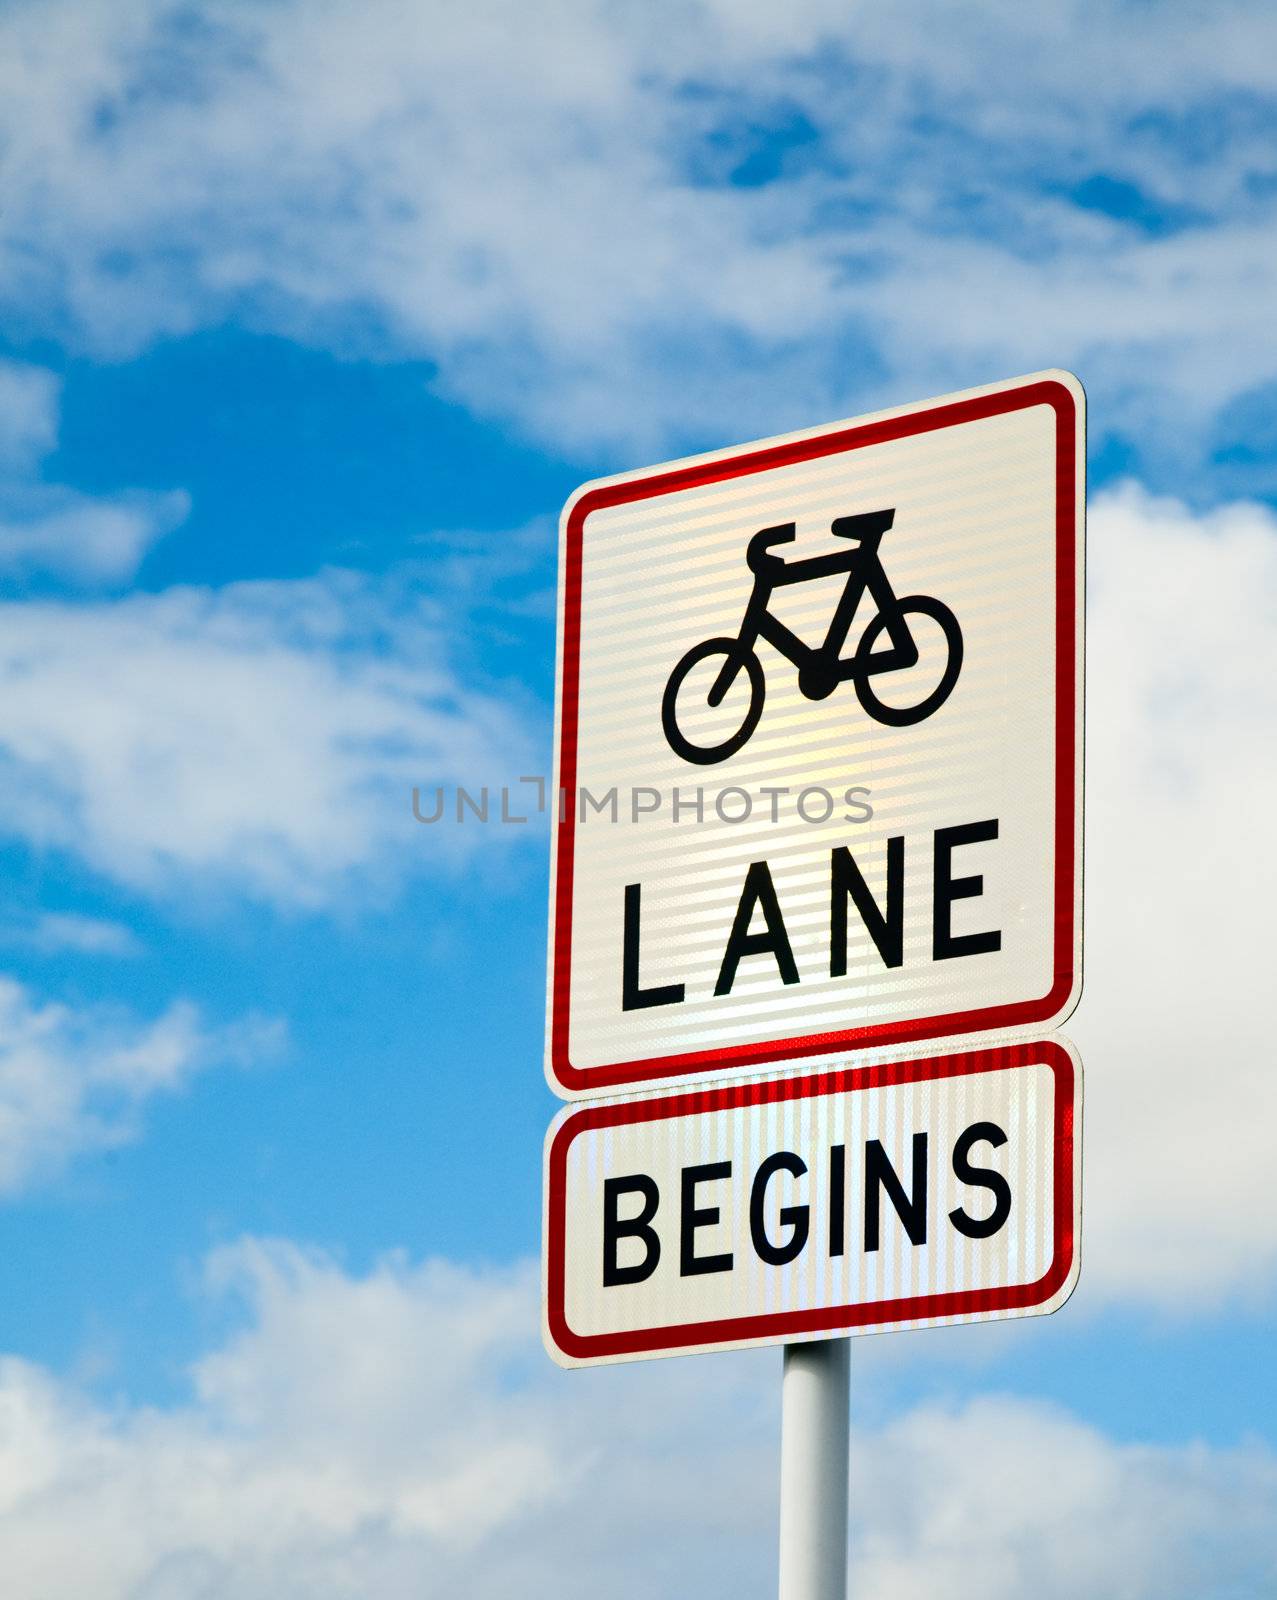 Bicycle lane sing against cloudy sky